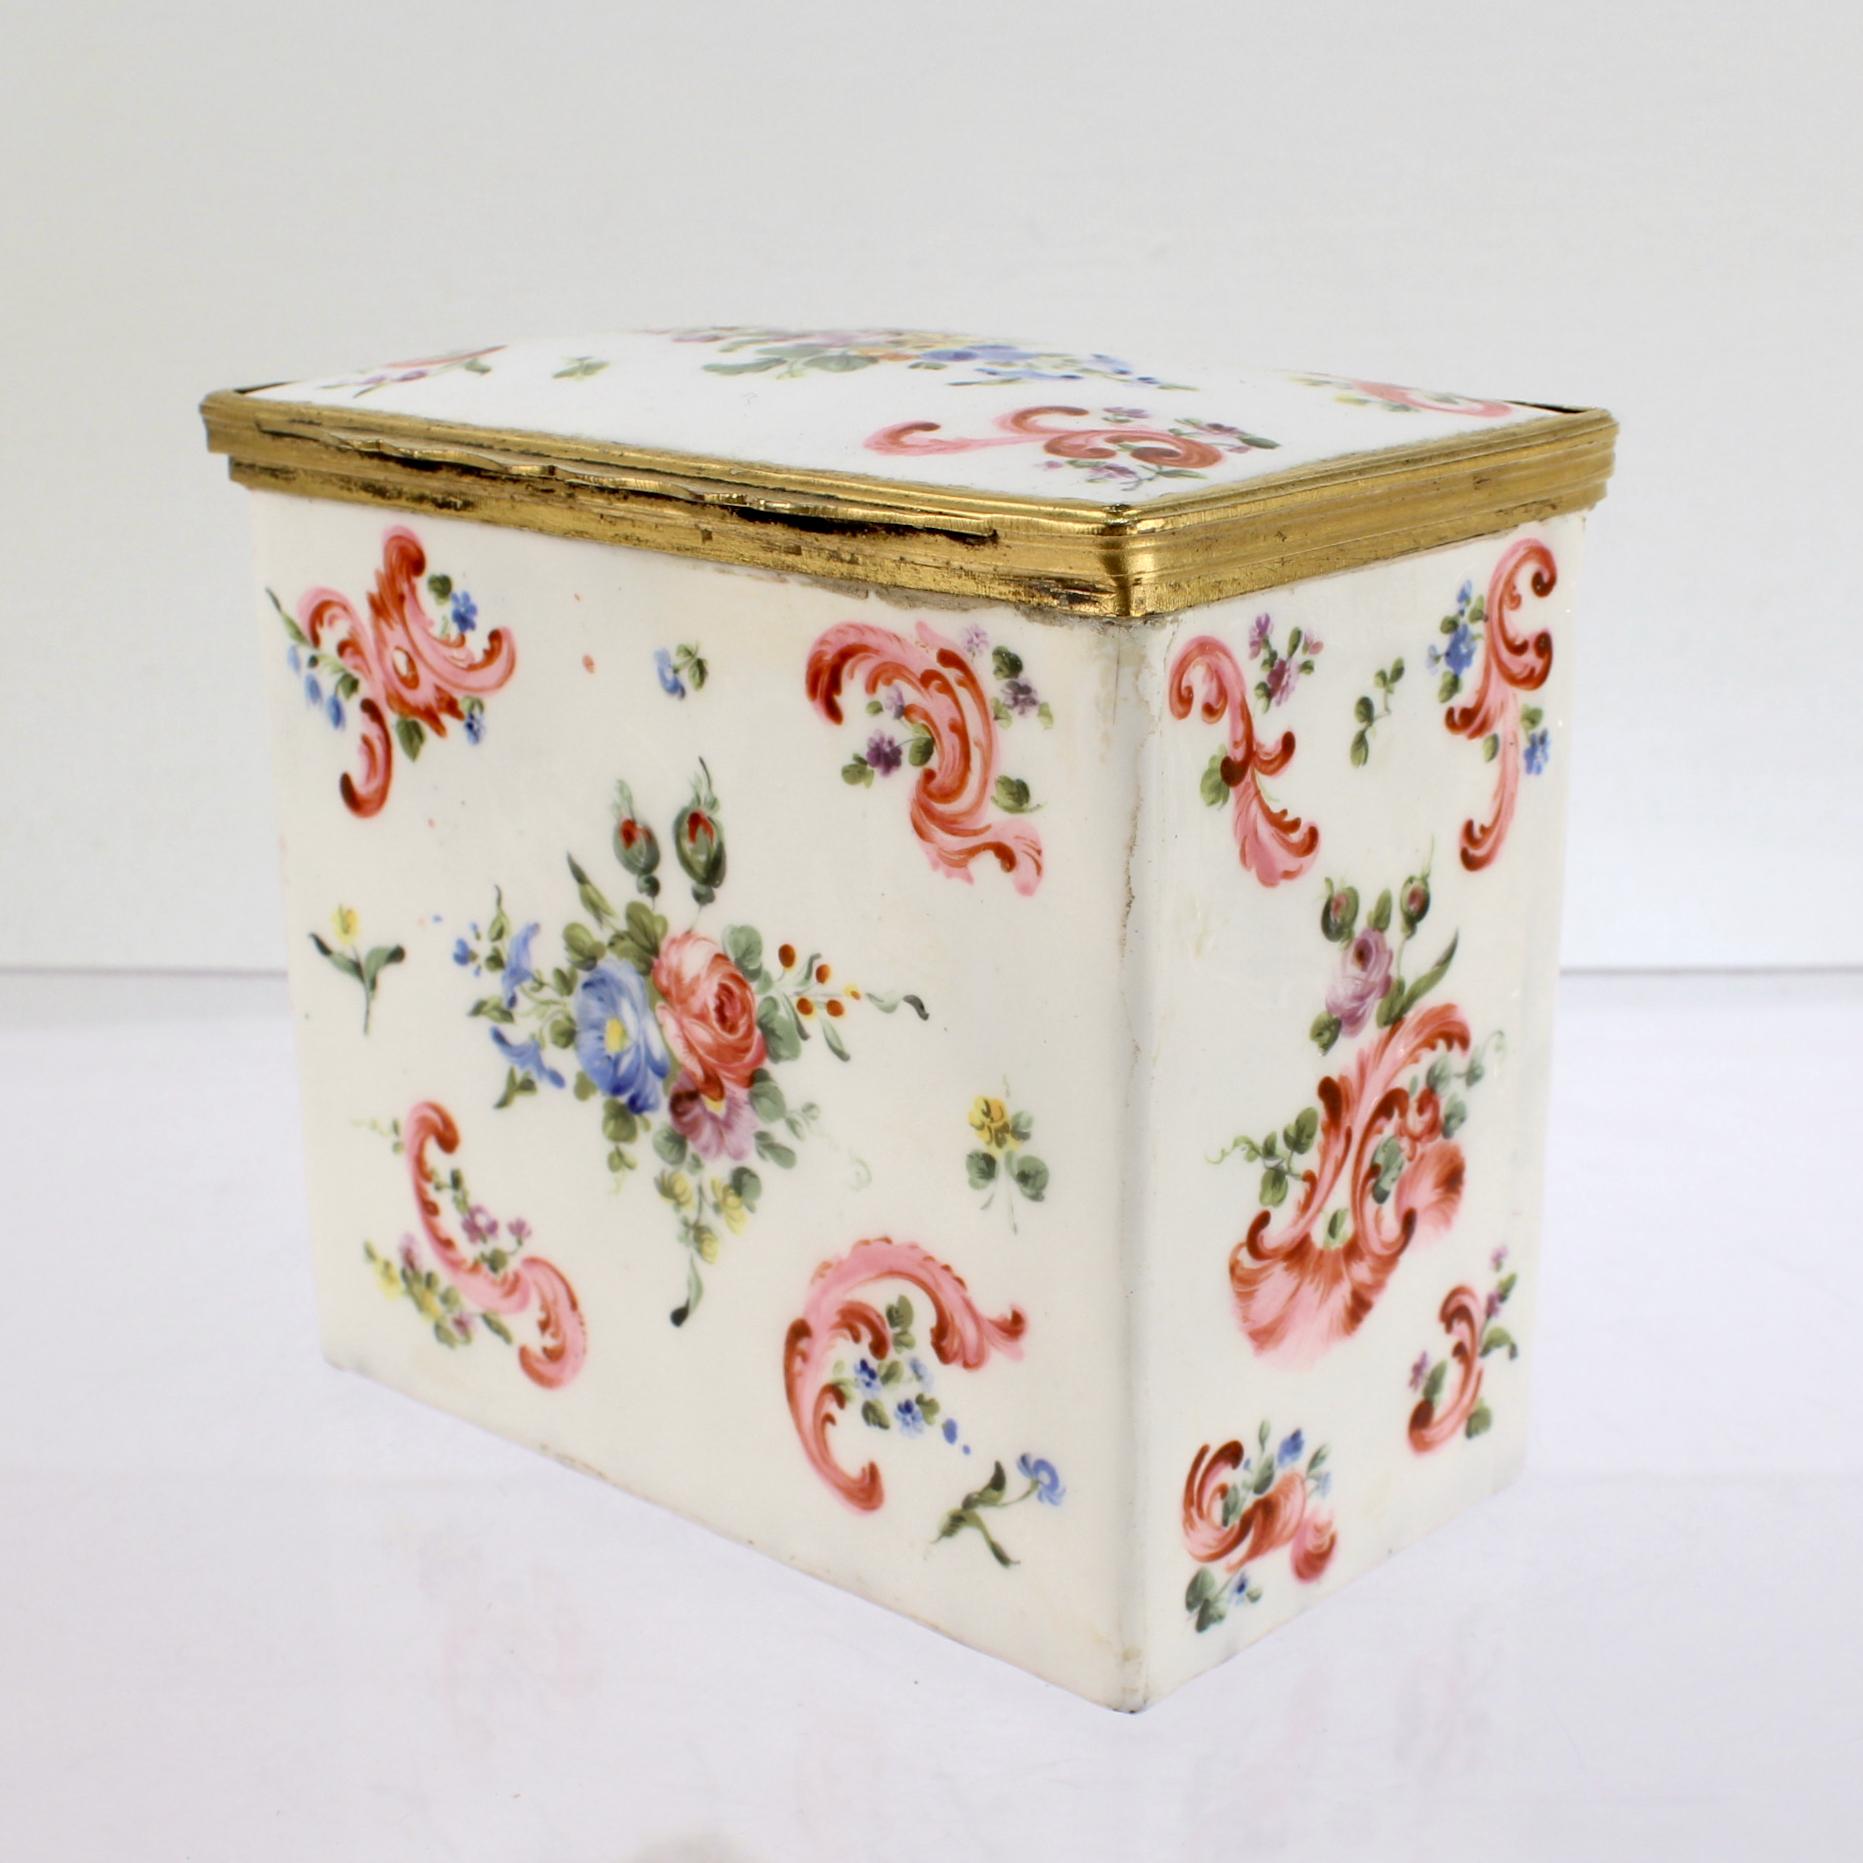 Antique 18c/19c English or French Enamel Bronze Mounted Tea Caddy Box In Fair Condition For Sale In Philadelphia, PA